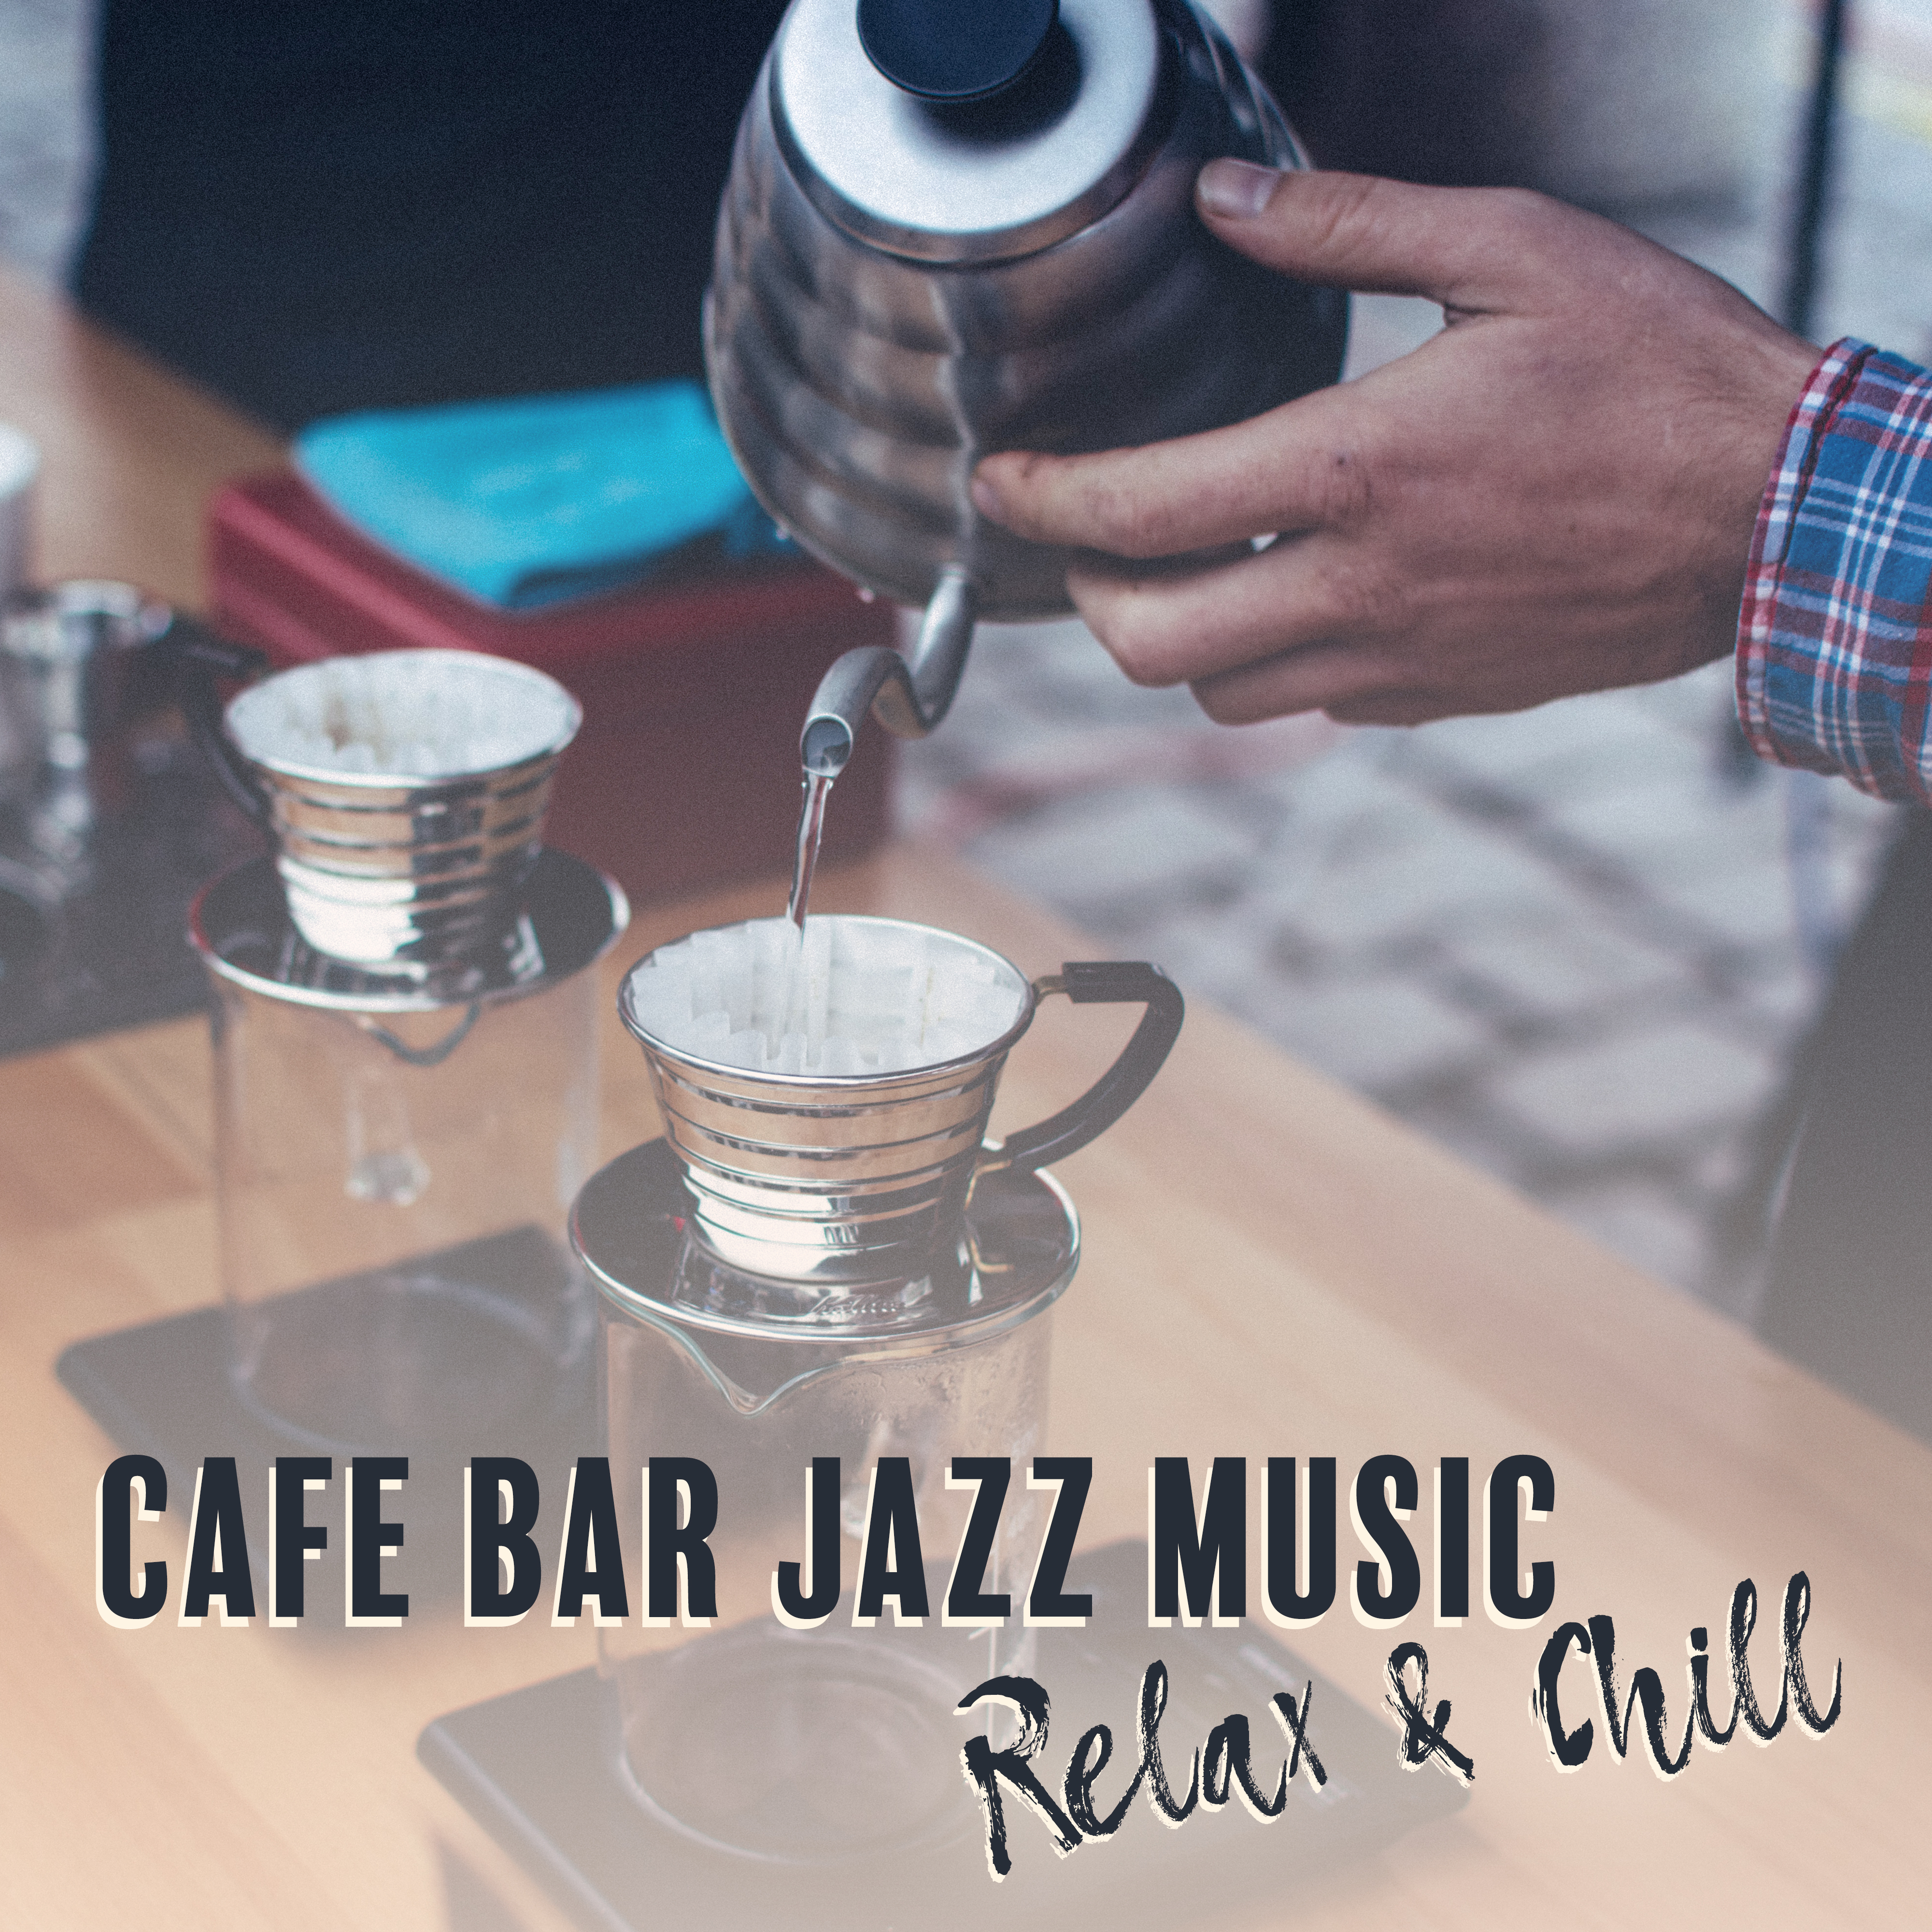 Cafe Bar Jazz Music  Relax  Chill